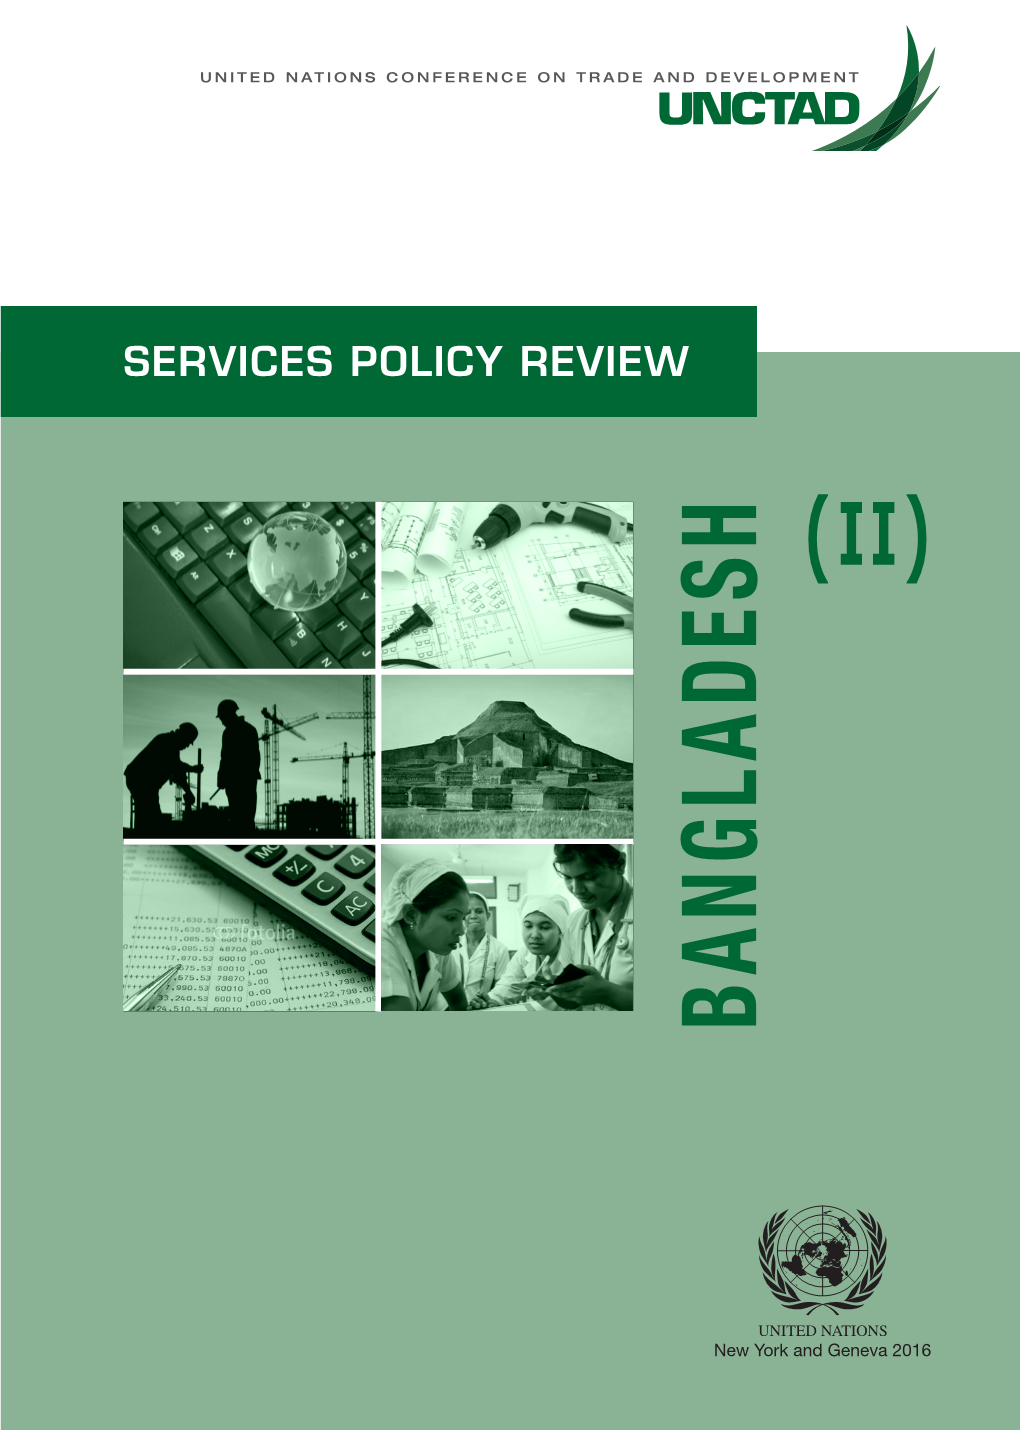 Services Policy Review of Bangladesh (Ii)